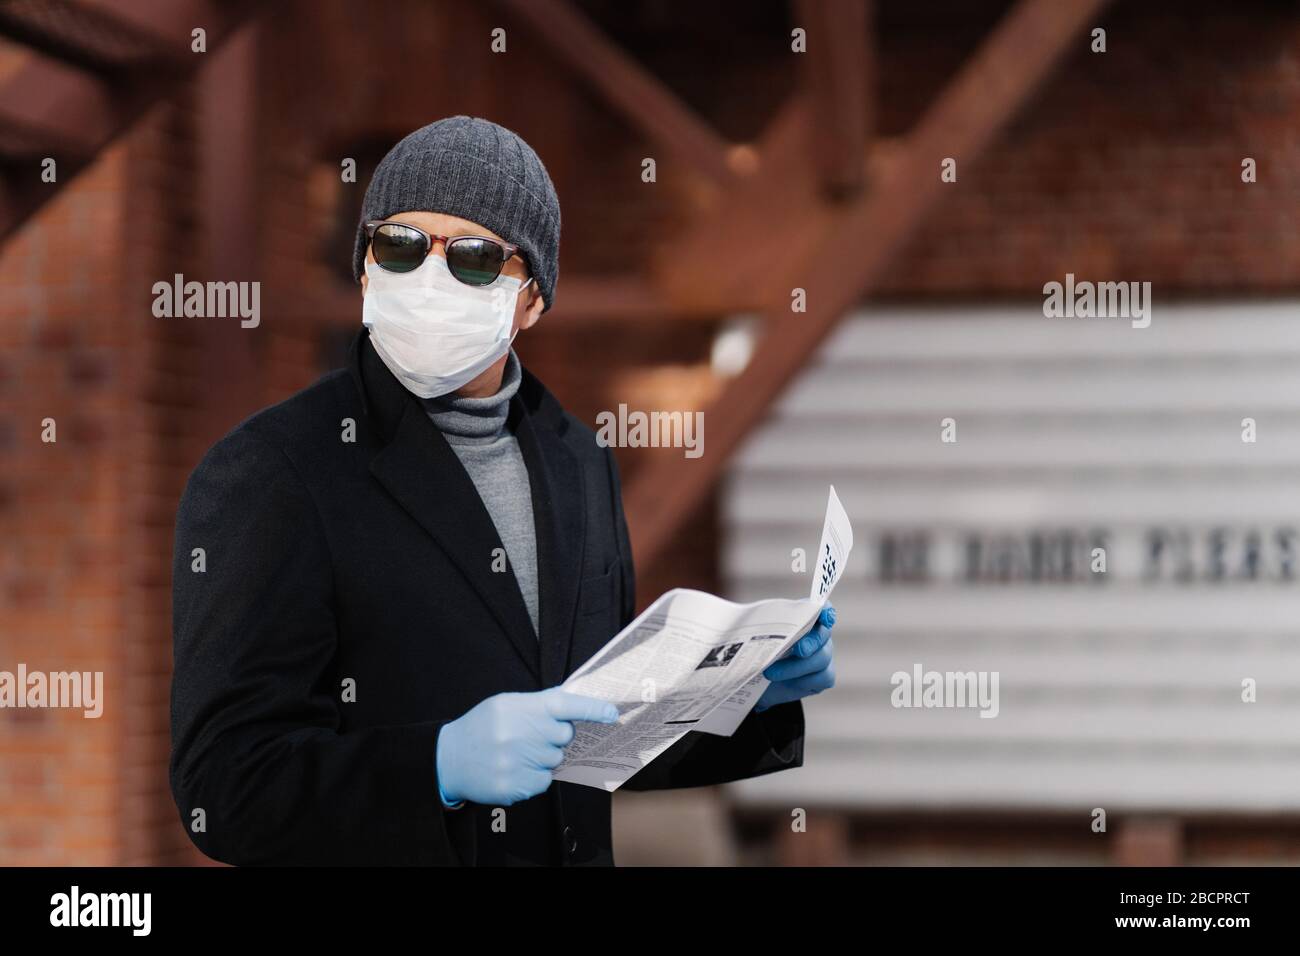 Horizontal shot of man uses virus preventive measures during coronavirus pandemic, wears face medical mask and rubber gloves, reads newspaper. Epidemi Stock Photo